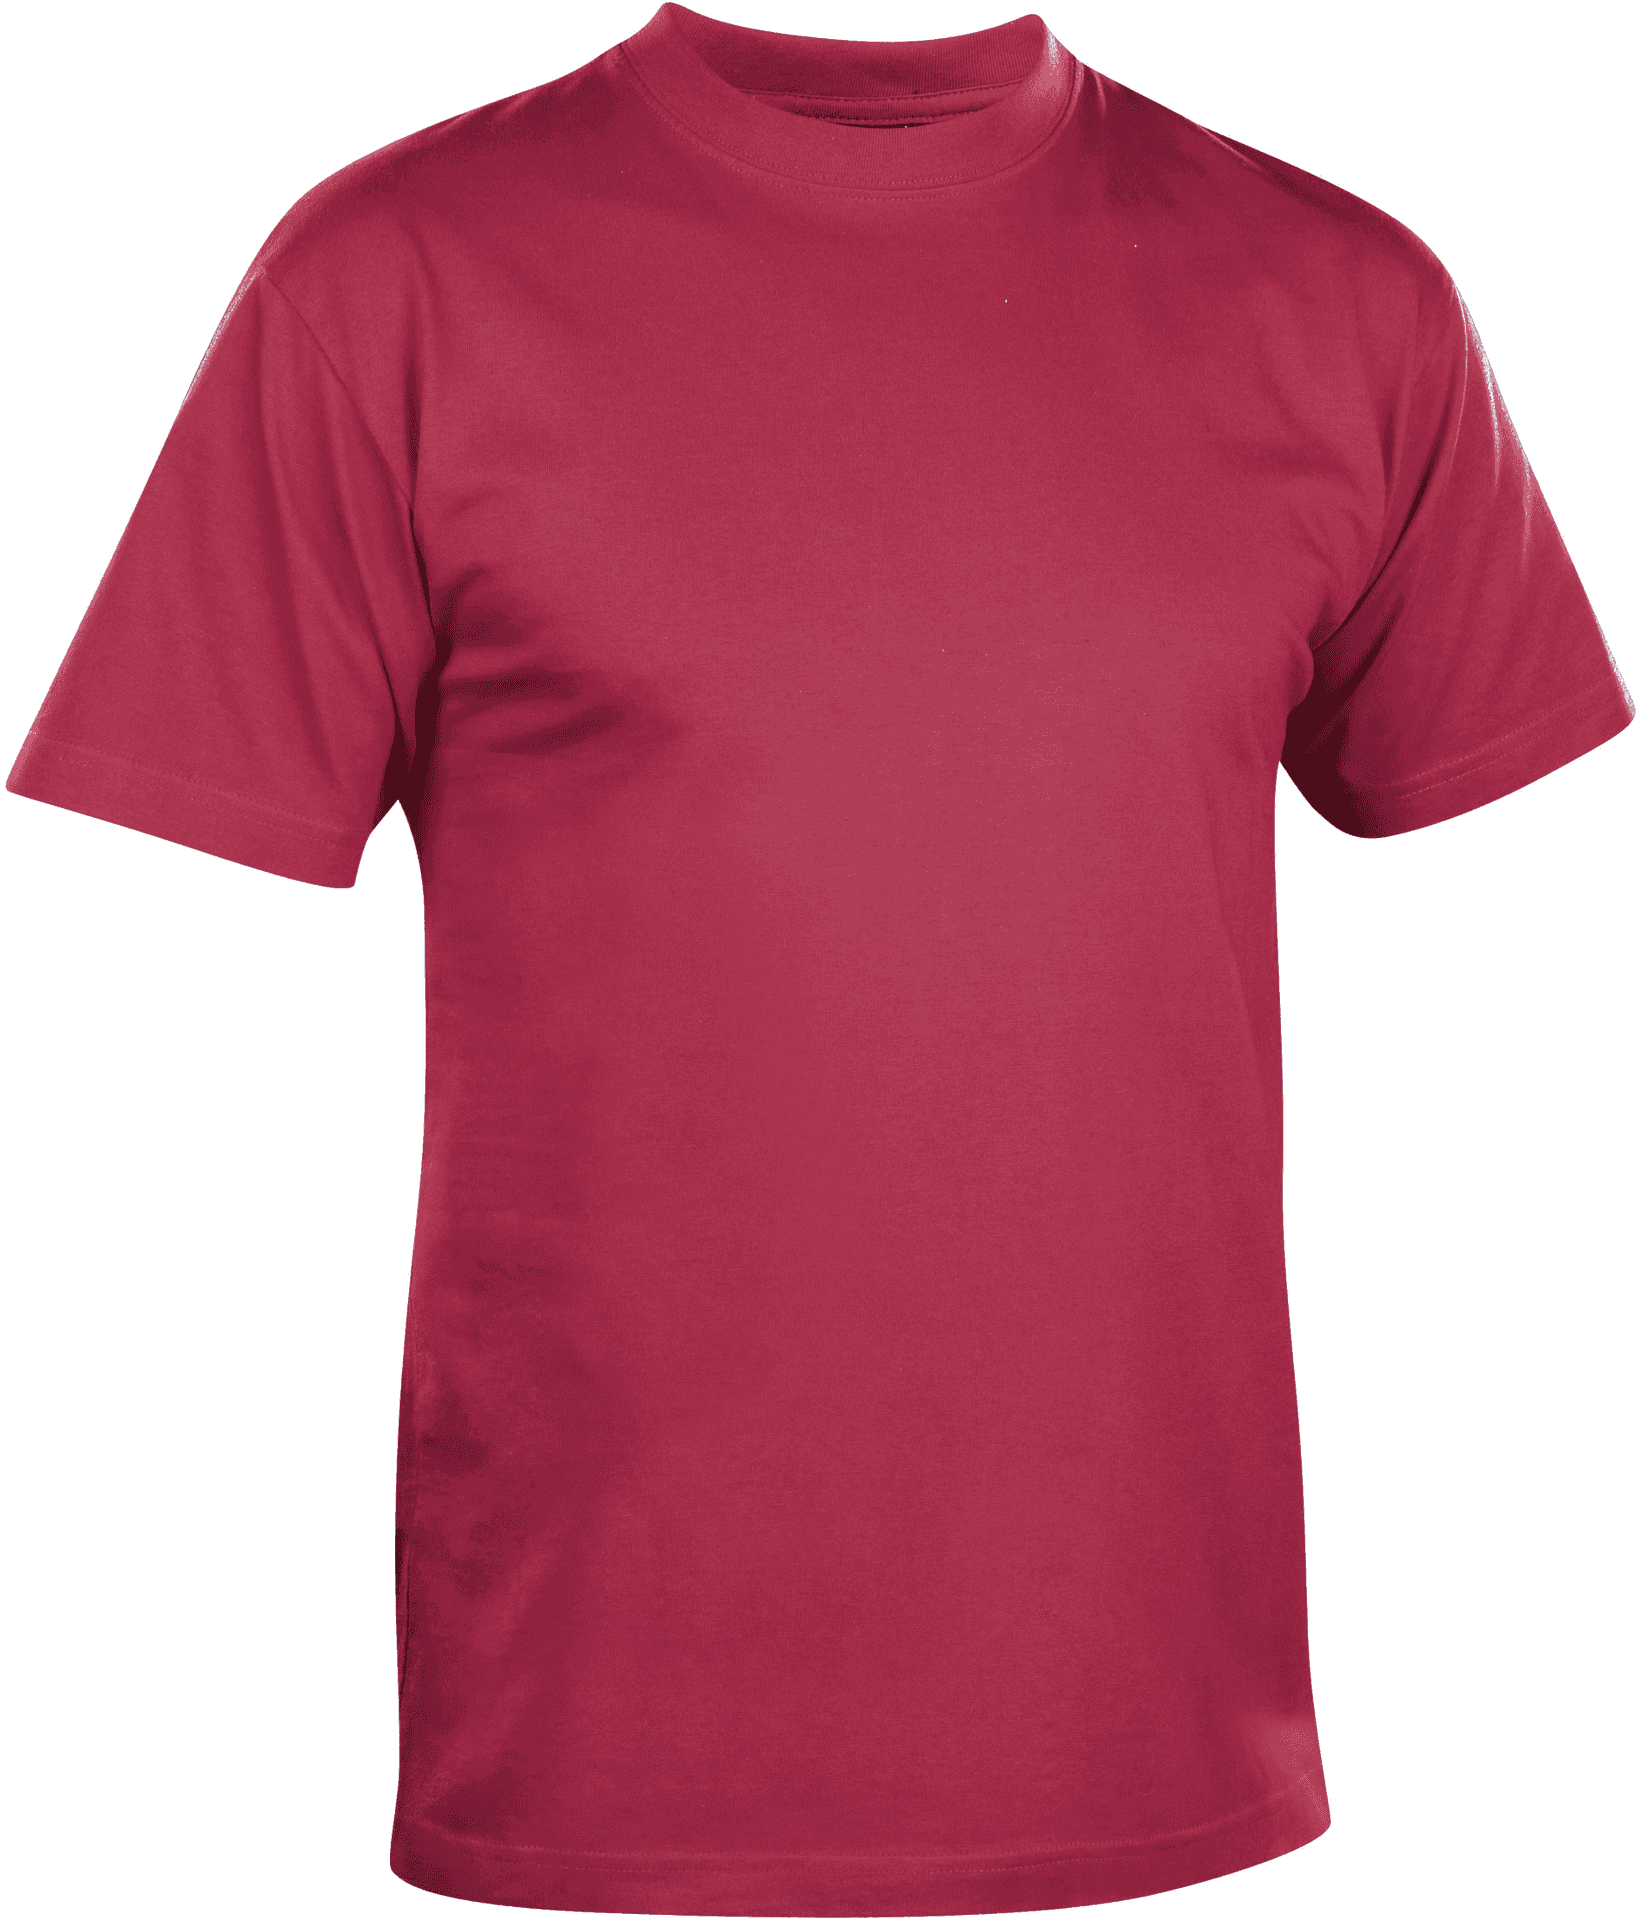 Red Crew Neck T Shirt PNG image